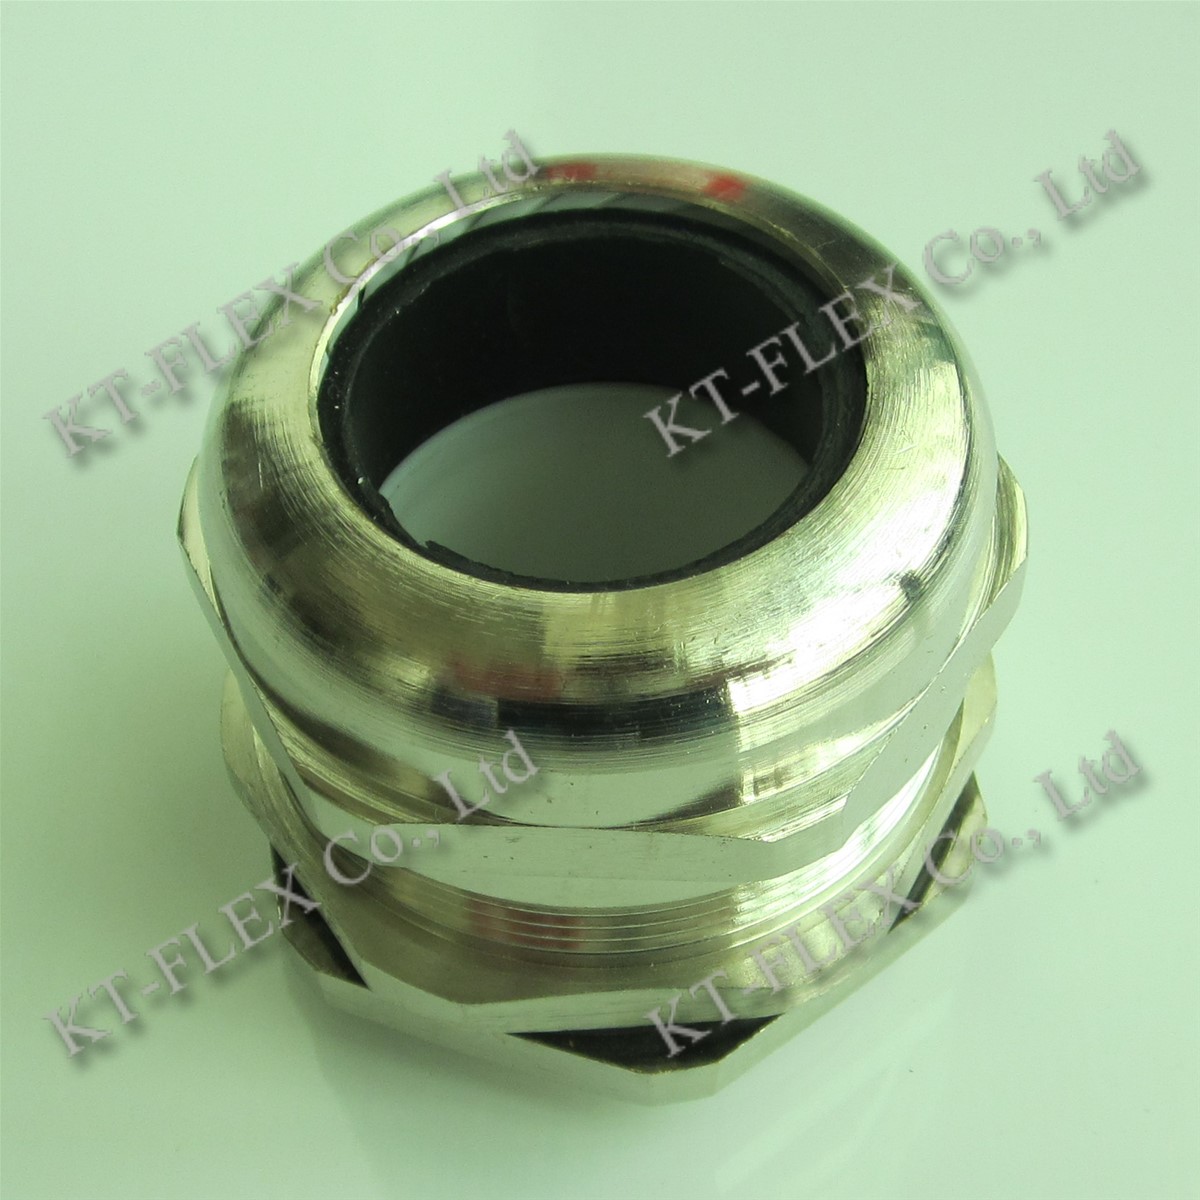 PG9 thread brass waterproof cable gland